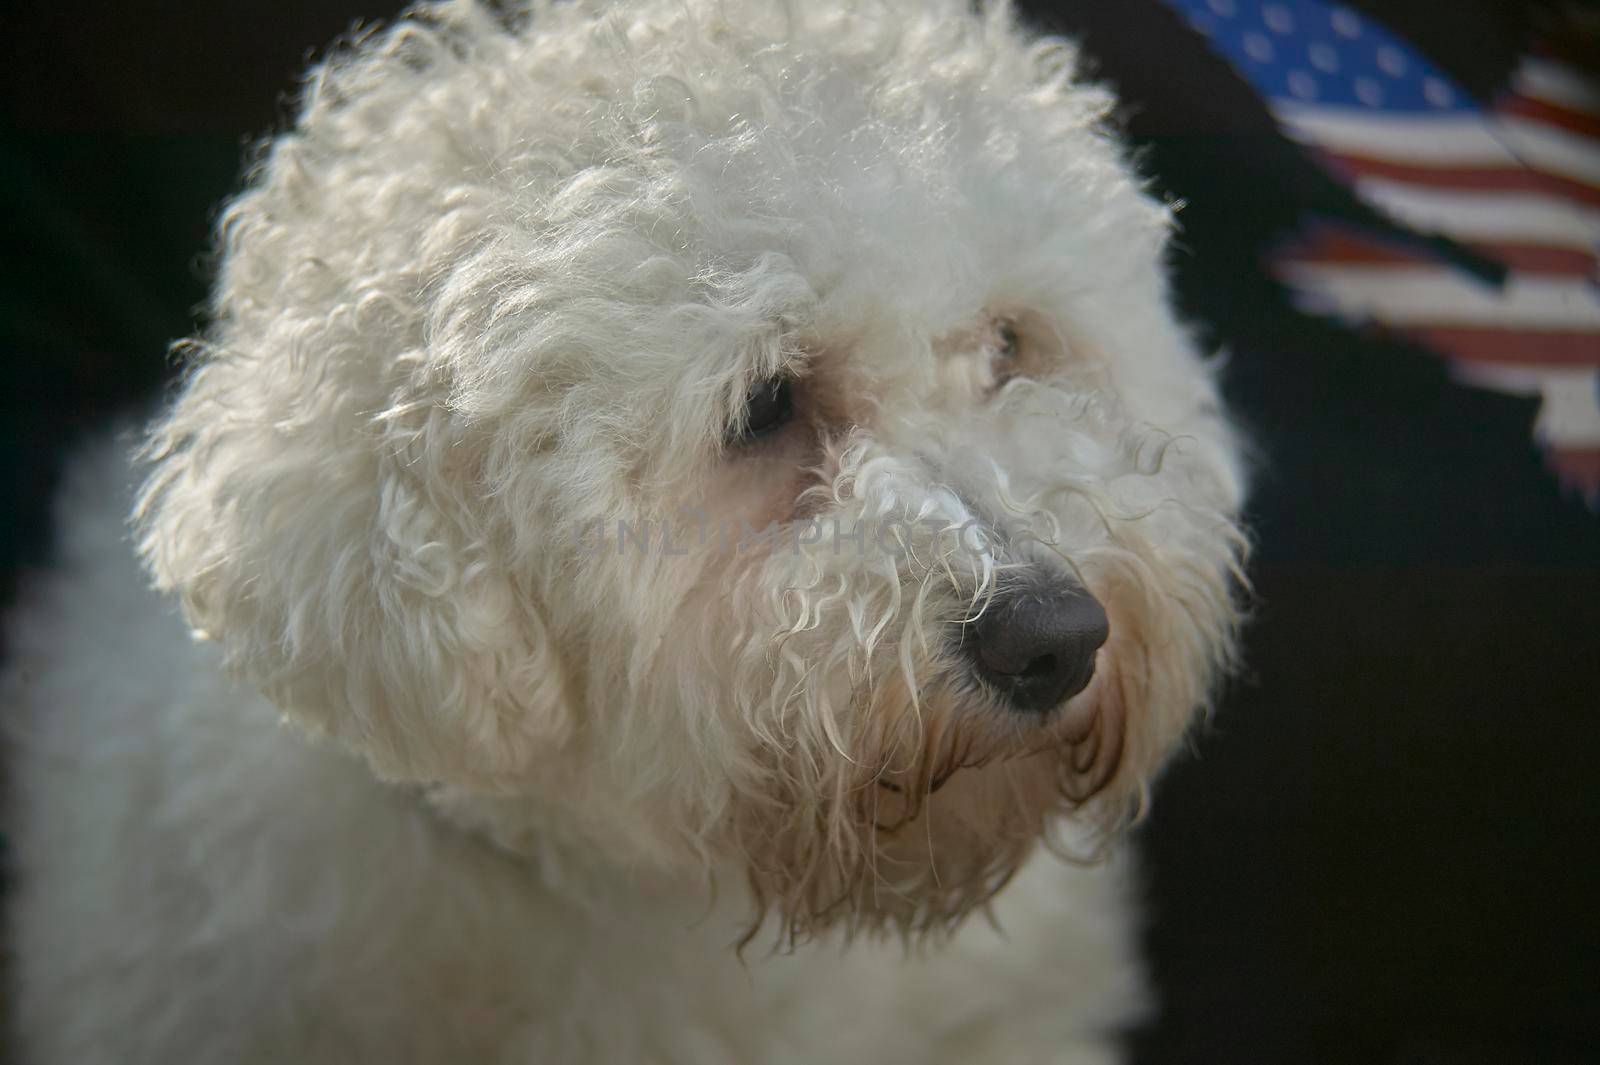 Poodle dog close up portrait with blurred background